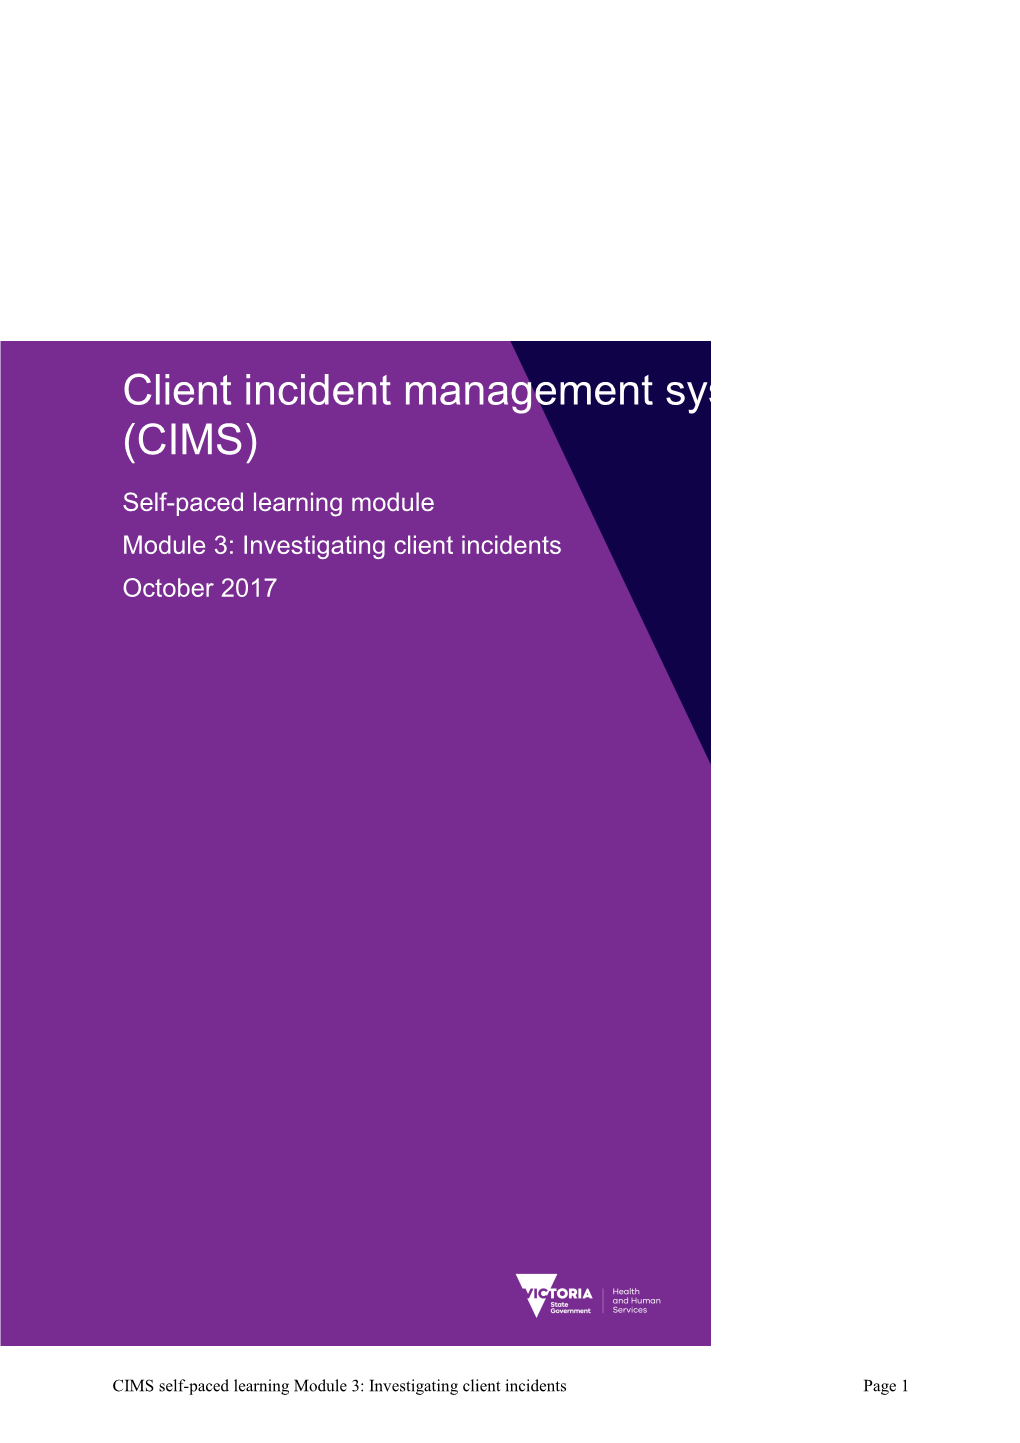 CIMS Learning Module 3 - Investigating Client Incidents